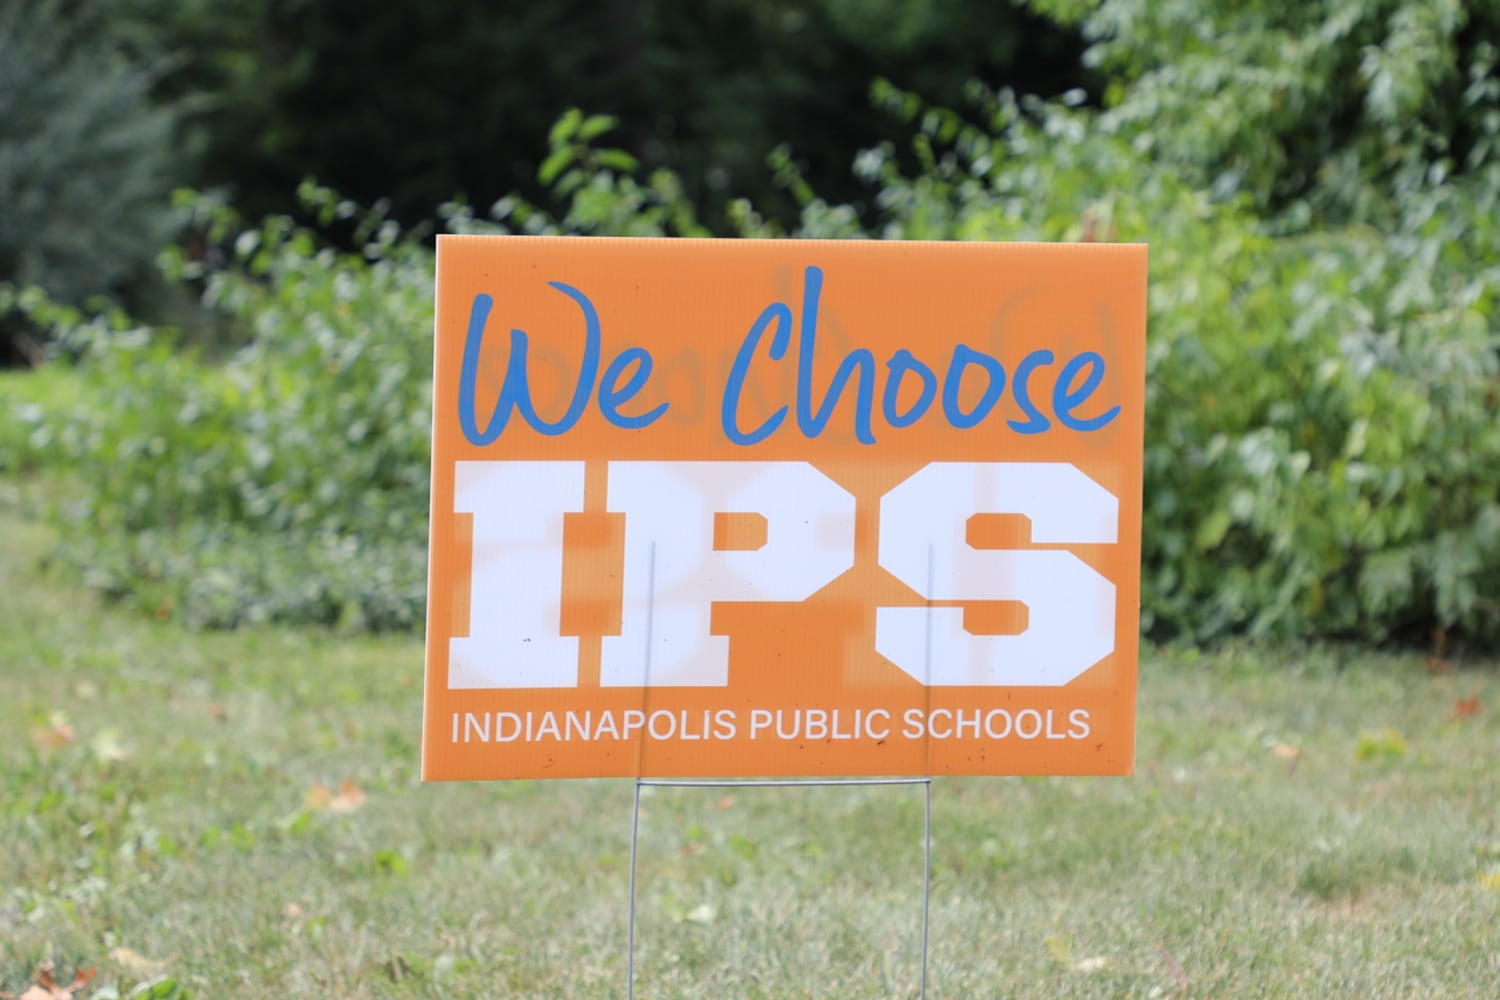 An orange lawn sign says “We Choose IPS Indianapolis Public Schools” stands on green grass. 